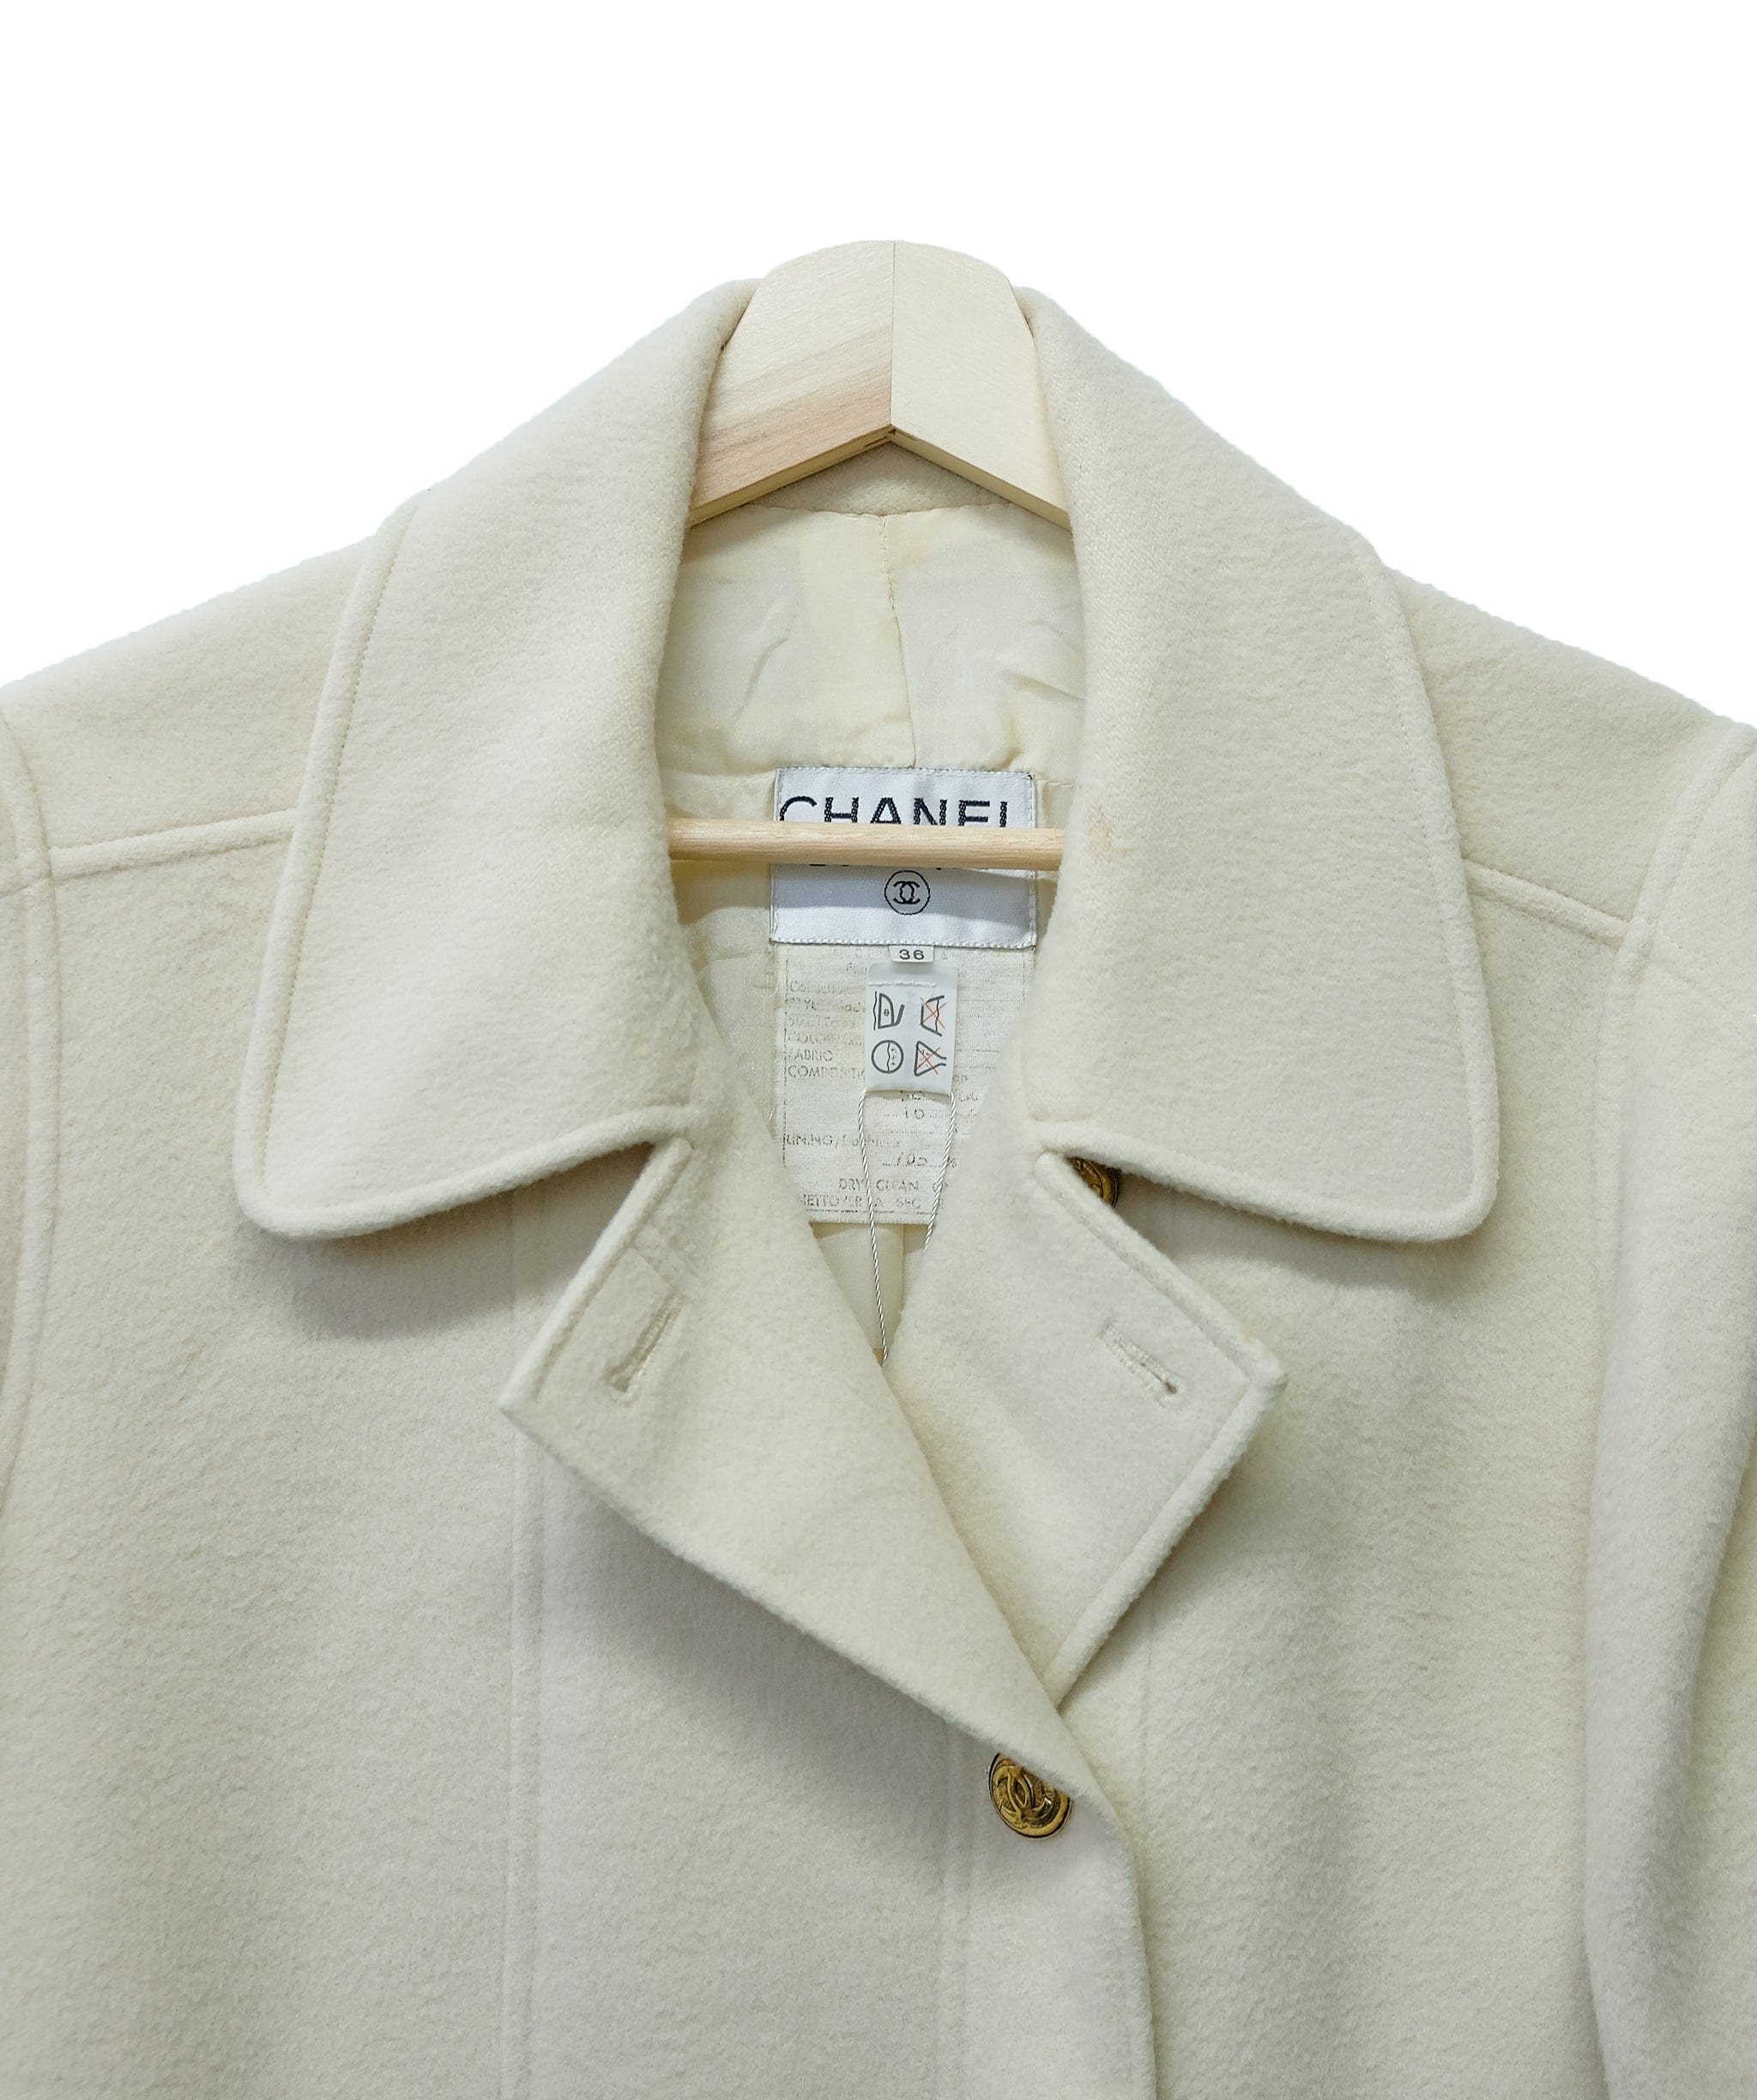 Chanel Chanel Gold Buttons Cashmere Jacket Cream Interior BC ASL10425